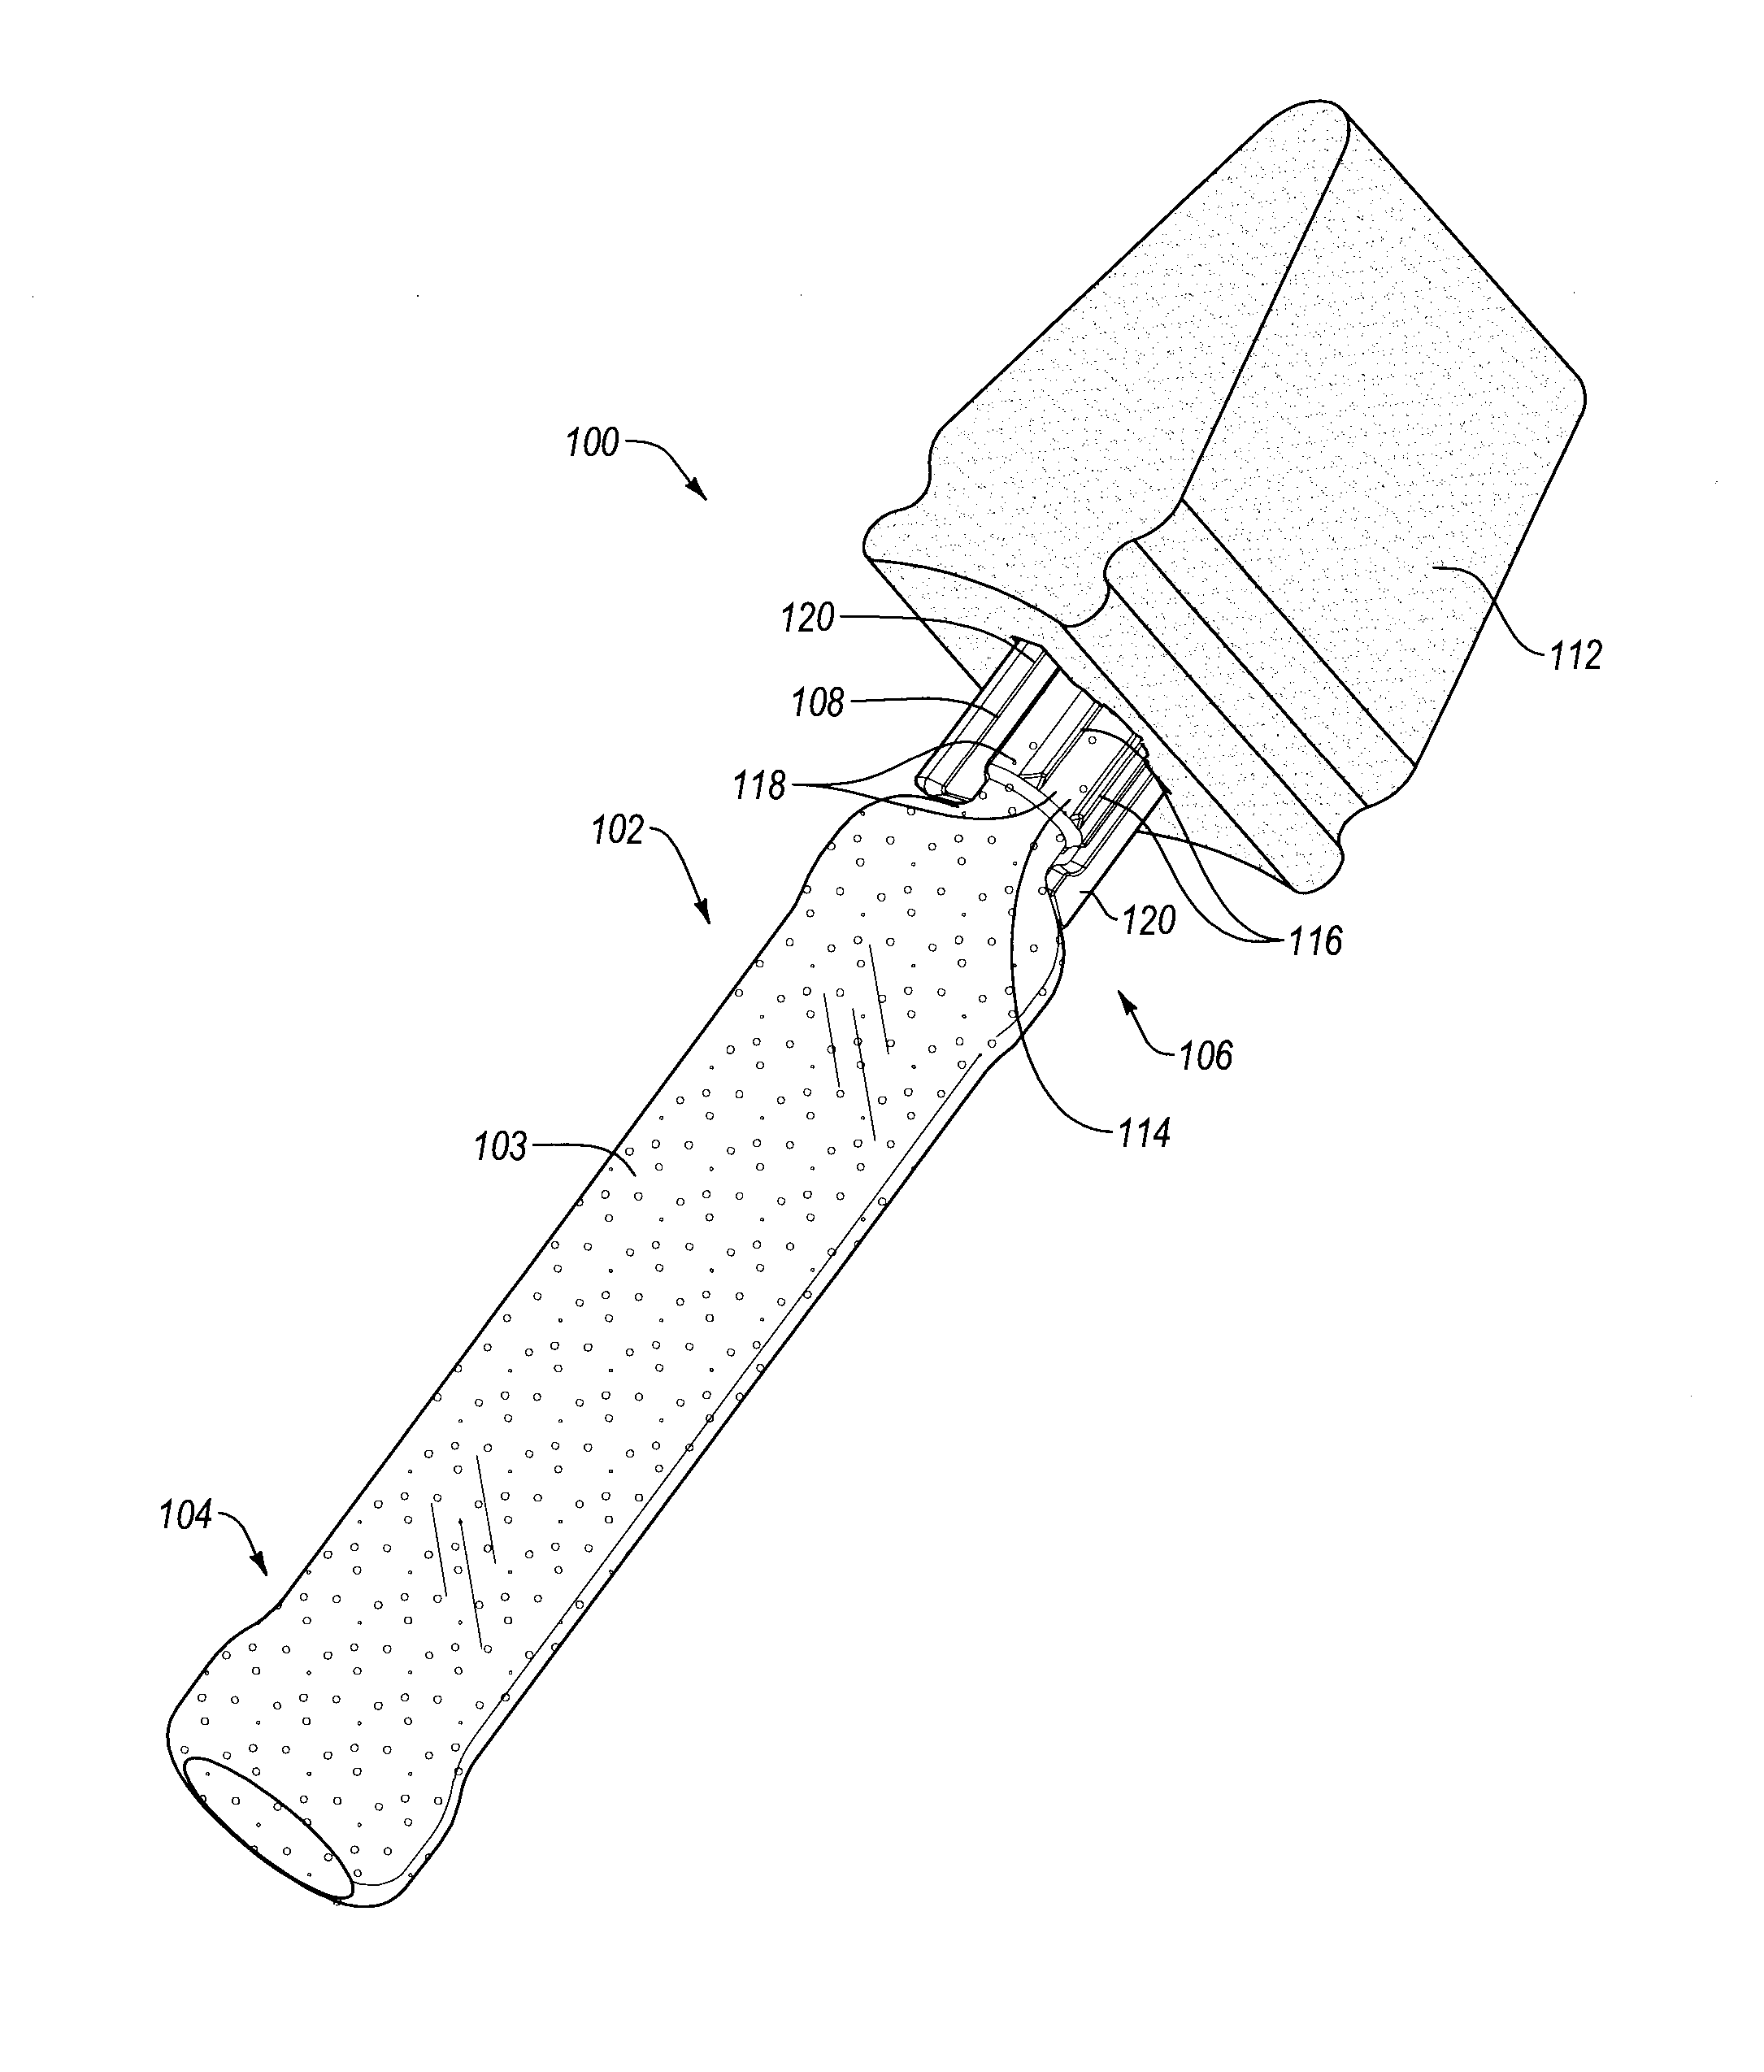 Skin antiseptic applicator and methods of making and using the same